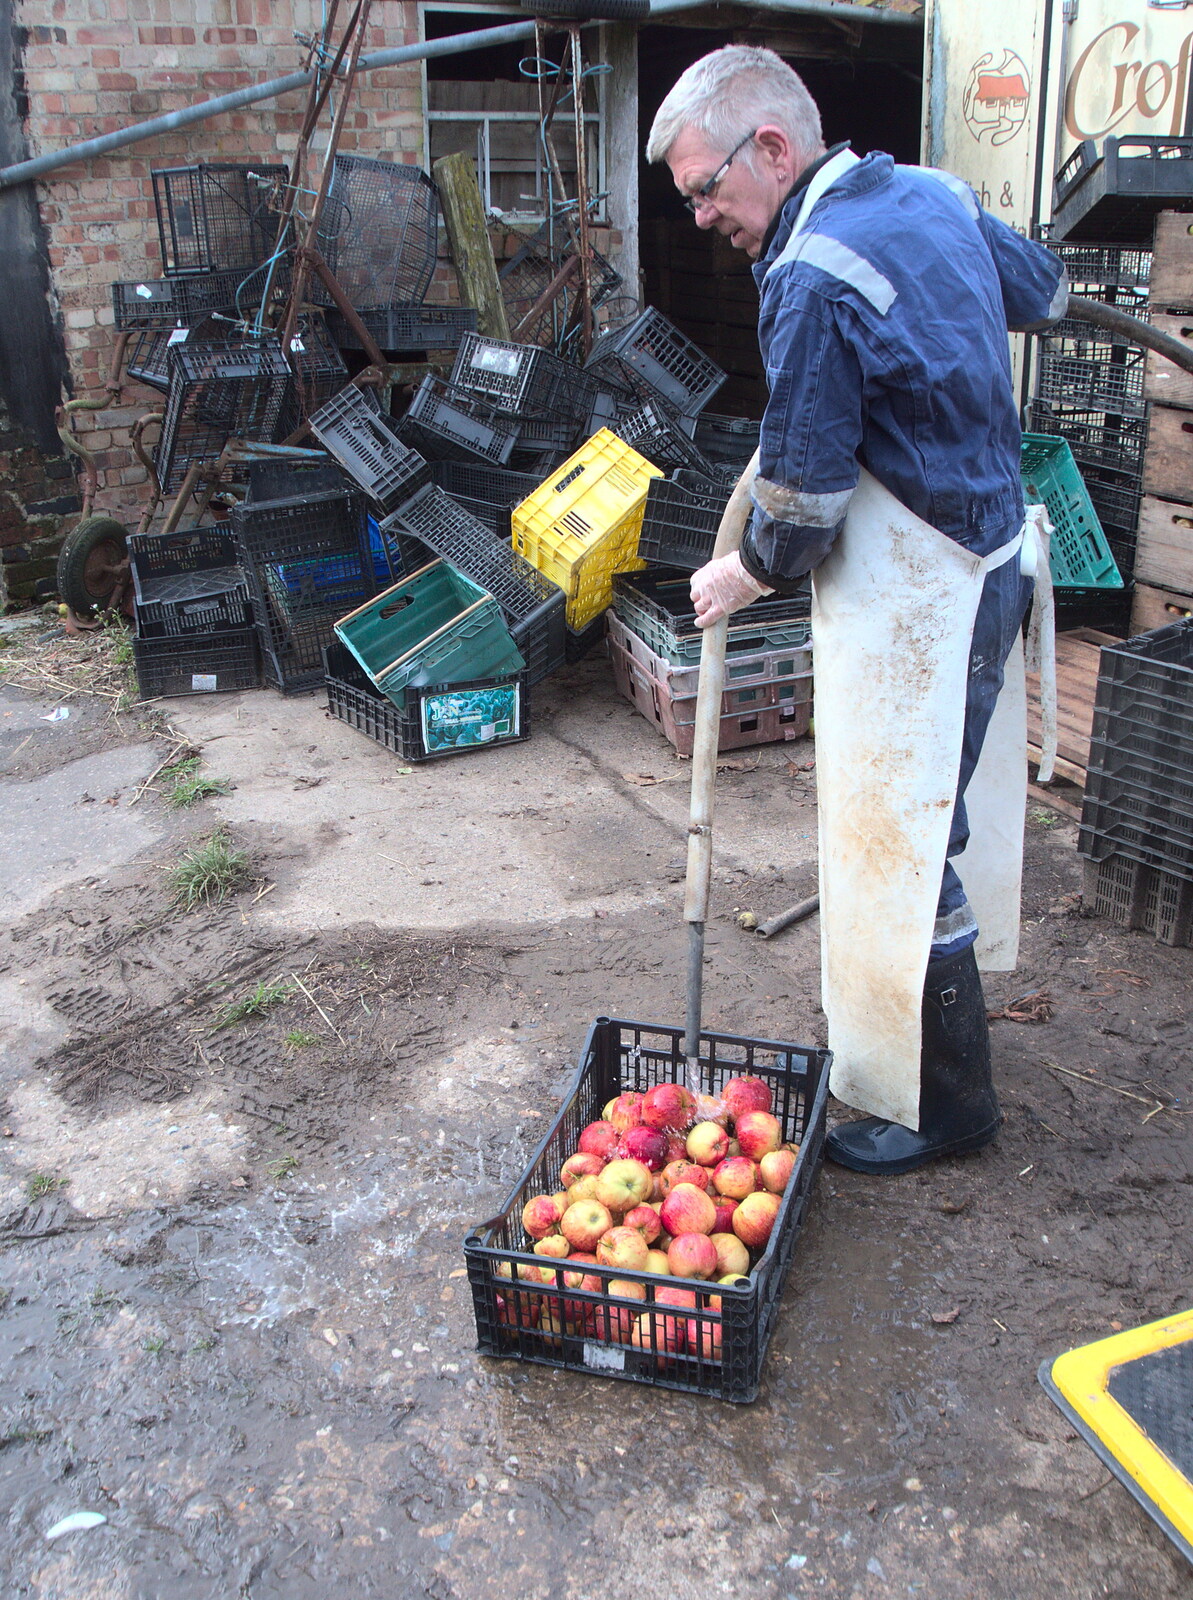 Trevor washes down some muddy apples from Apples and Fireworks, Carleton Rode and Palgrave, Suffolk - 4th November 2018